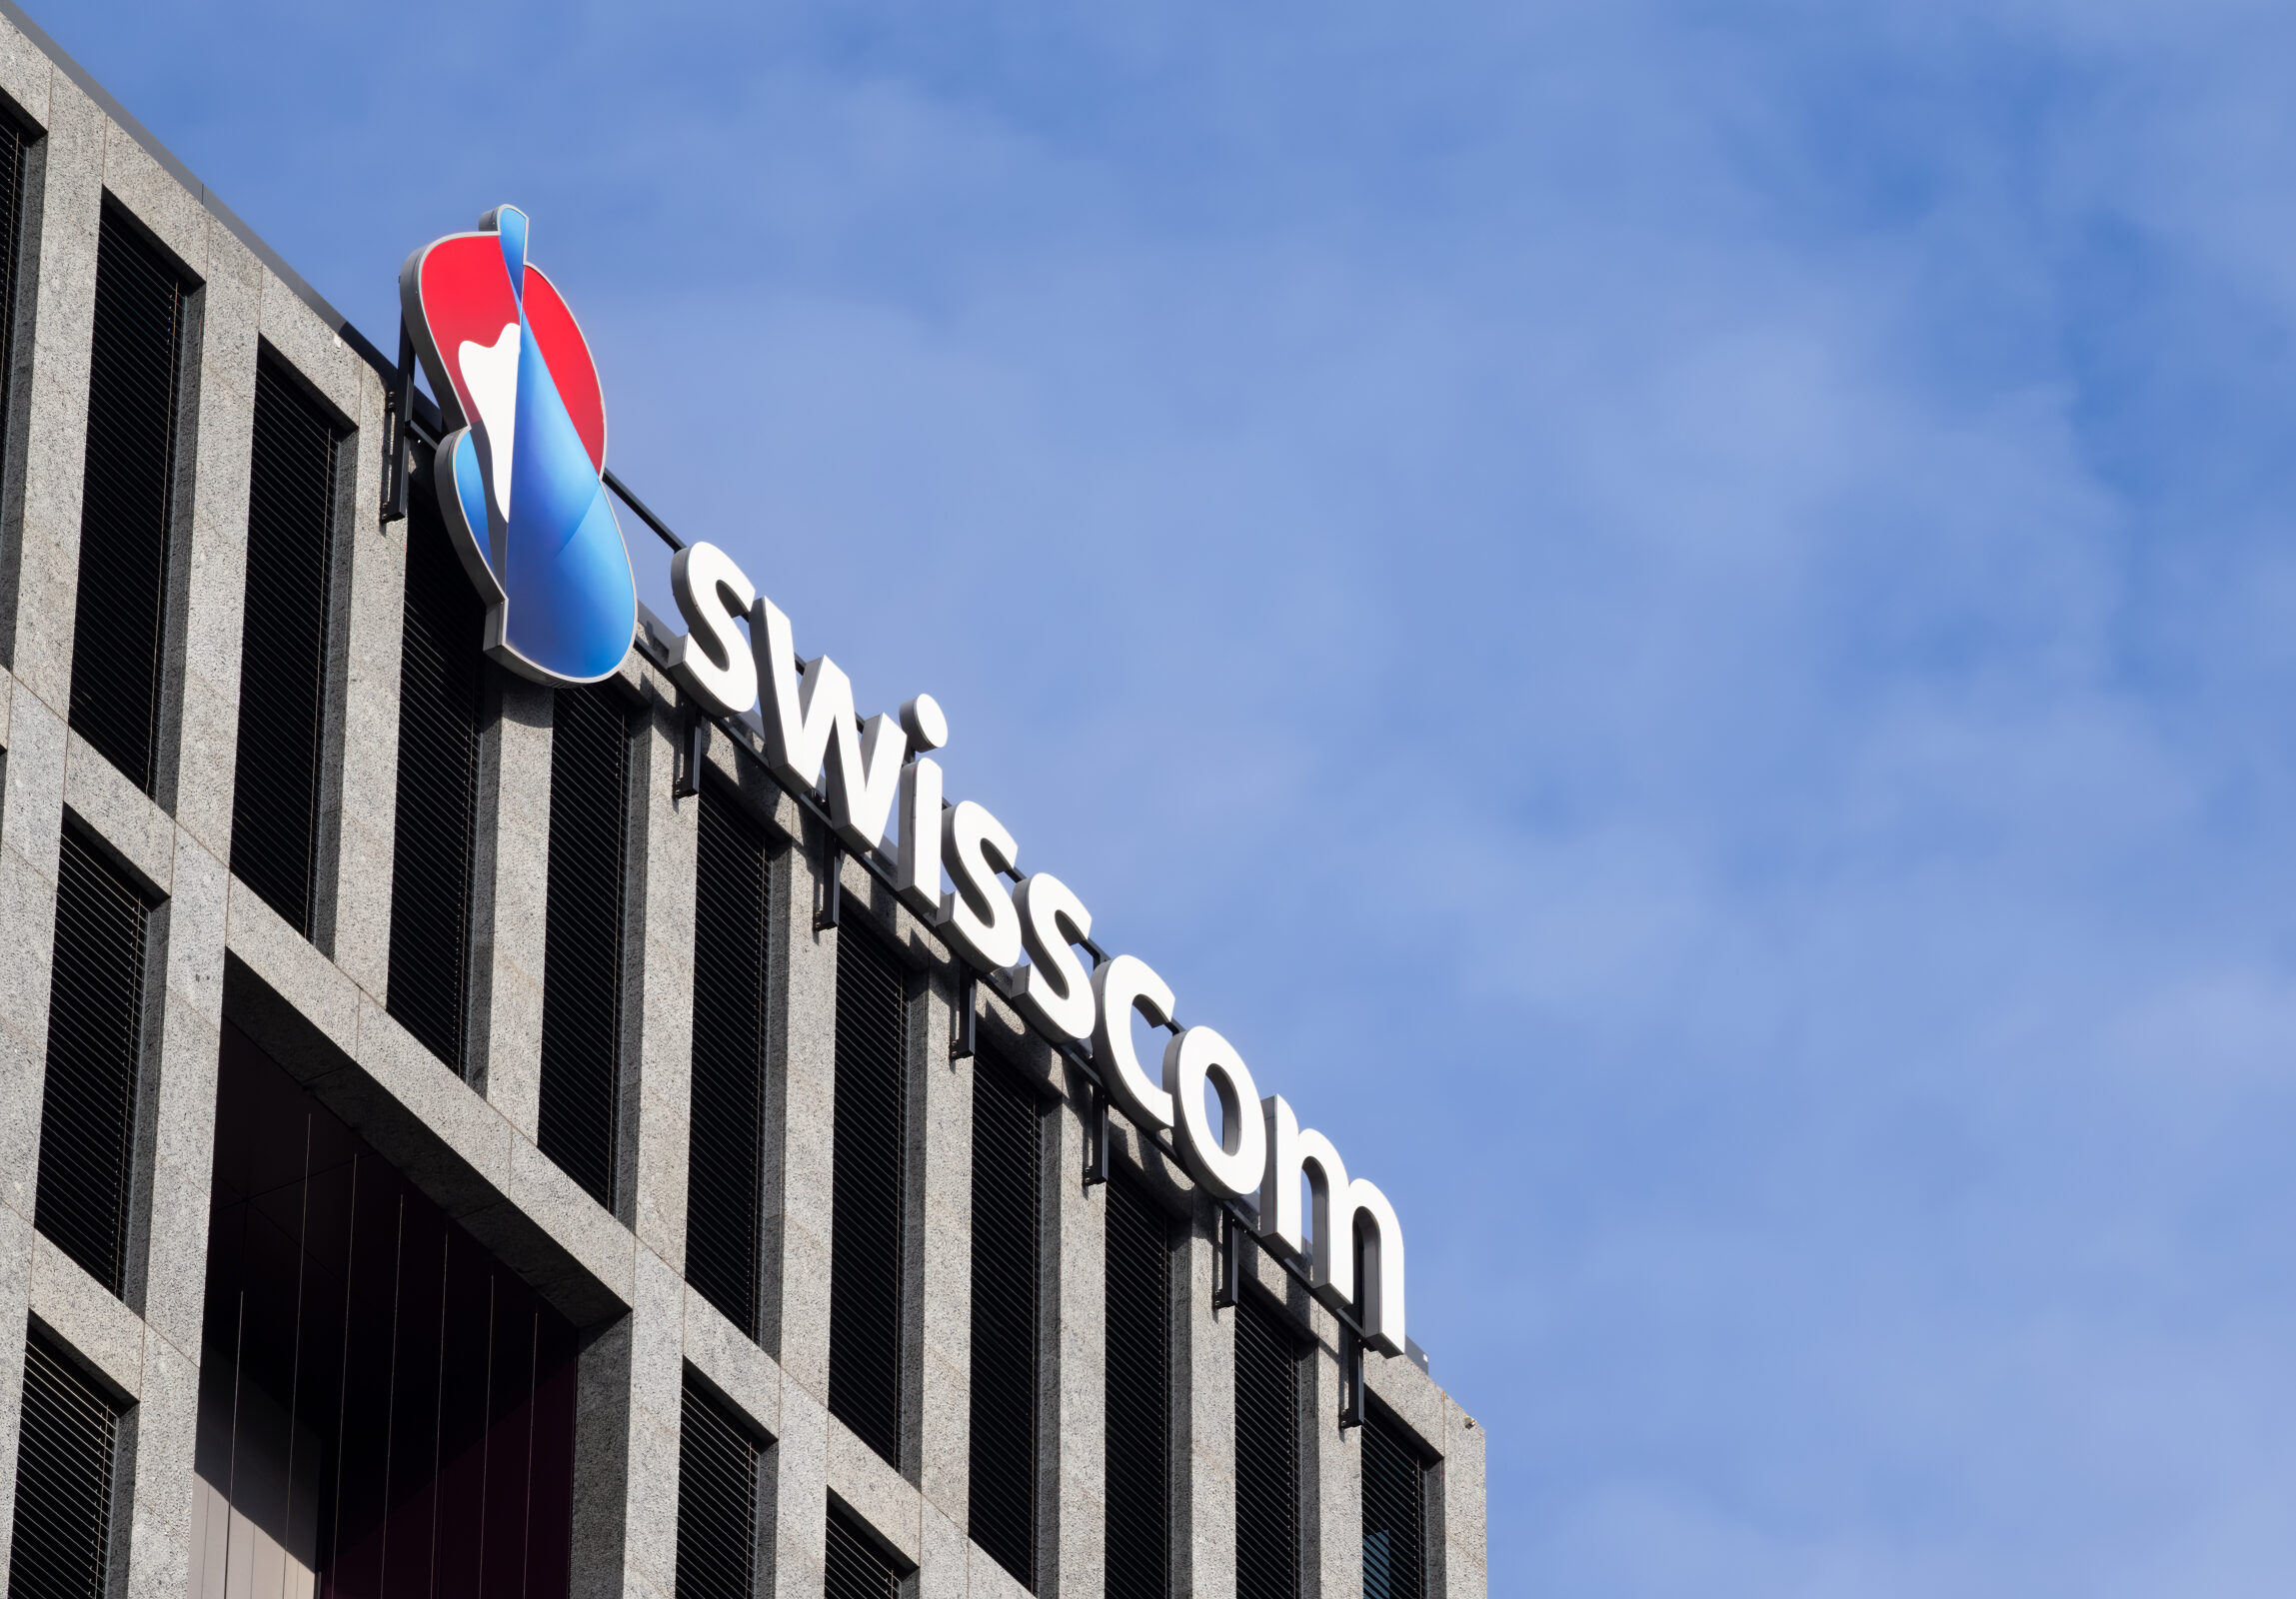 The Italian Presidency of the Council of Ministers approves the transaction between Swisscom and Vodafone